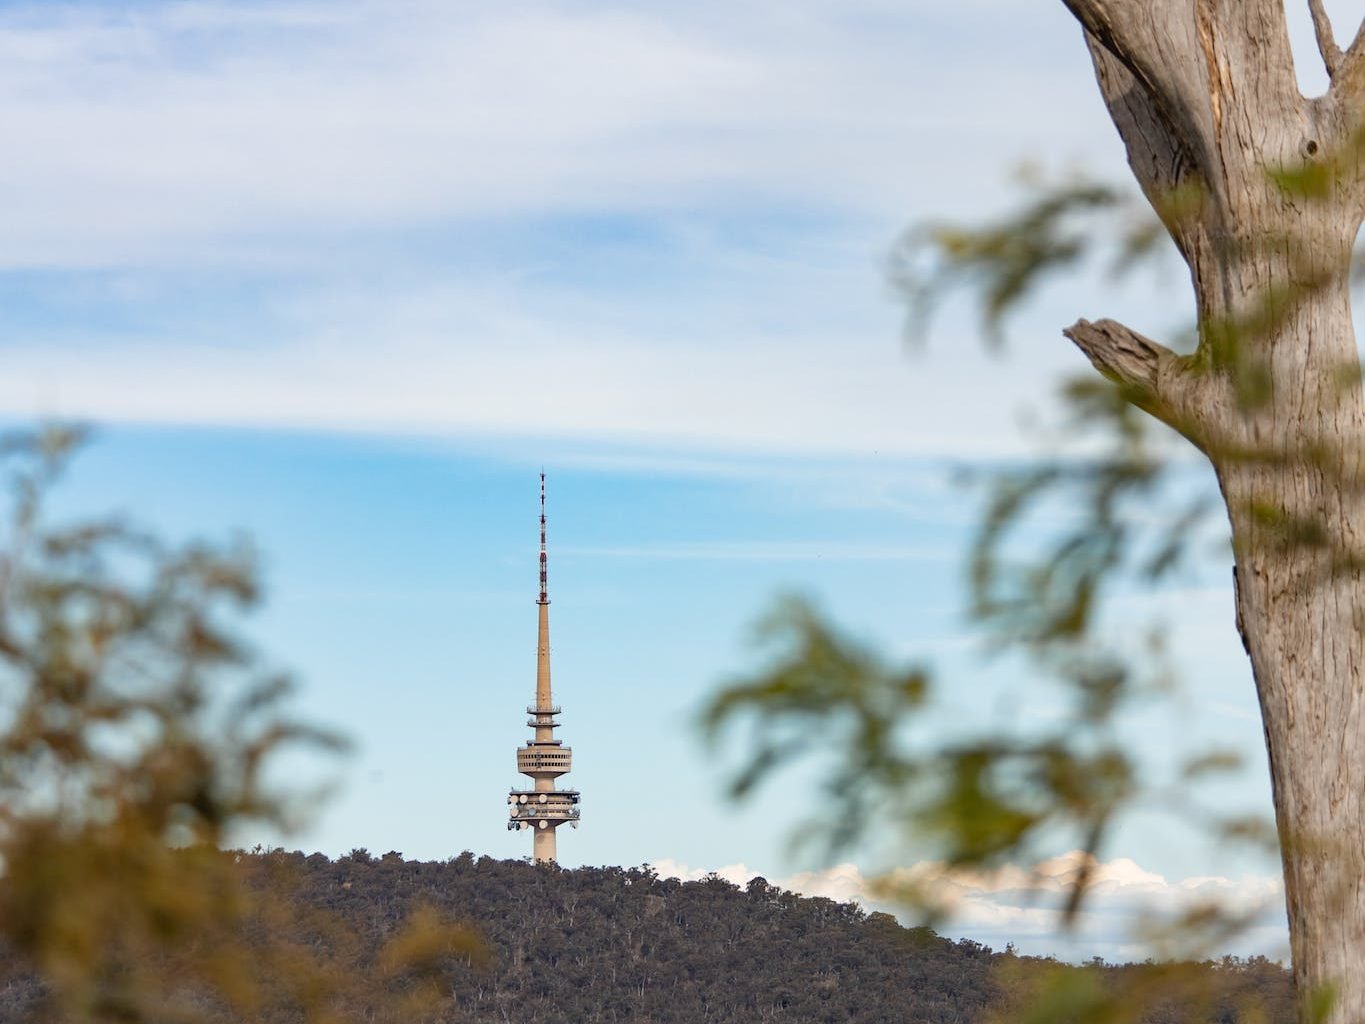 Telstra Tower Under the Blue Sky